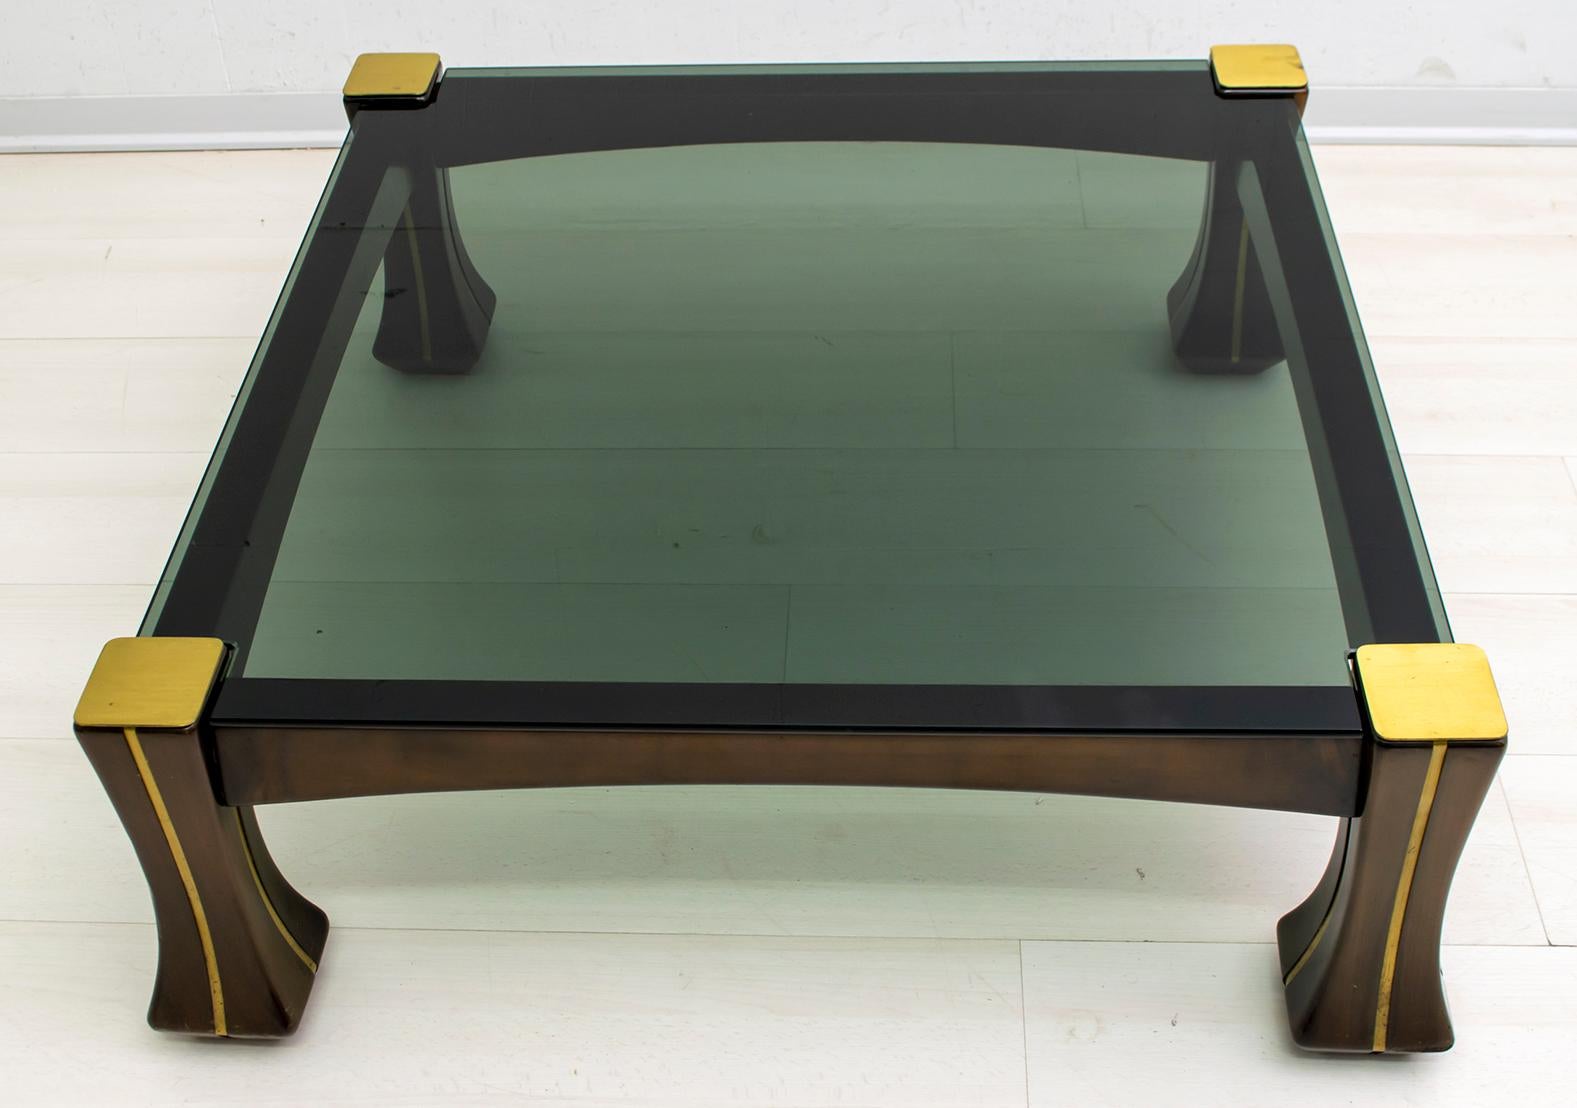 This coffee table was designed by Luciano Frigerio. It is in wood with brass friezes, the top is in smoked glass. This model is part of the 